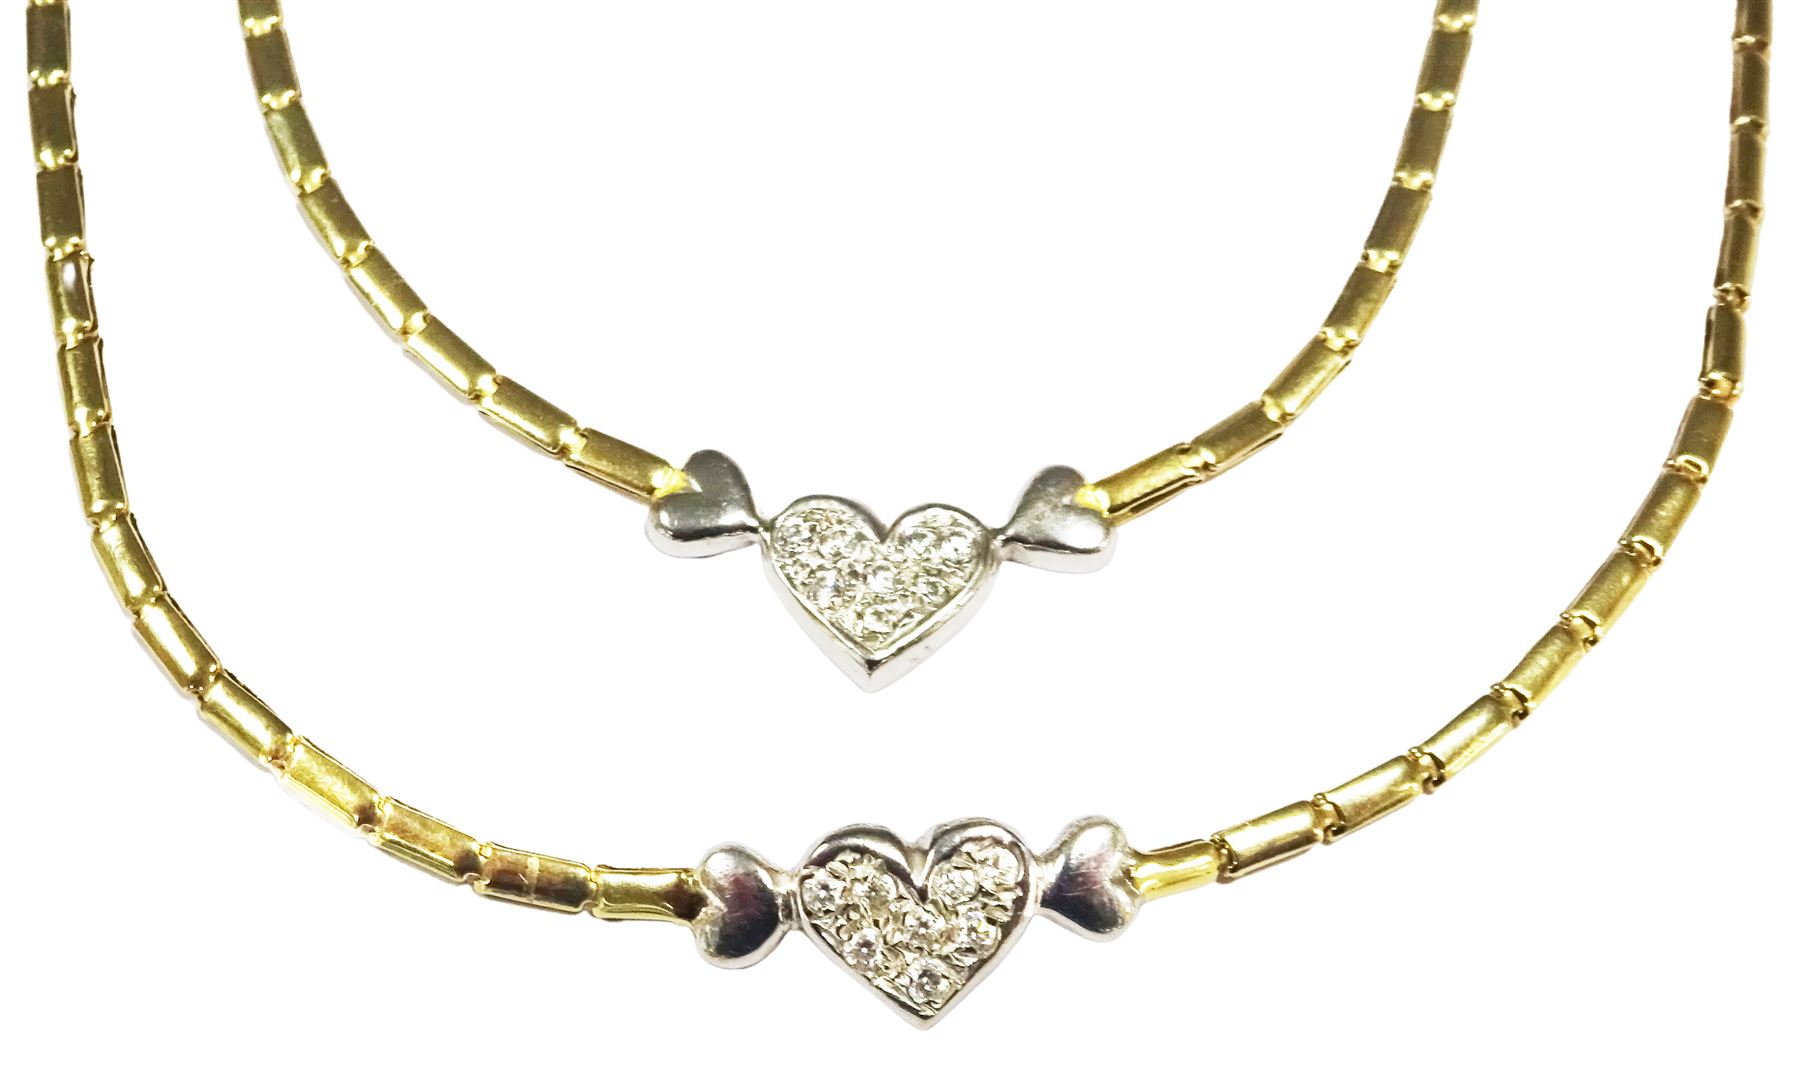 14ct white and yellow gold cubic zirconia heart necklace with matching bracelet - Image 2 of 2